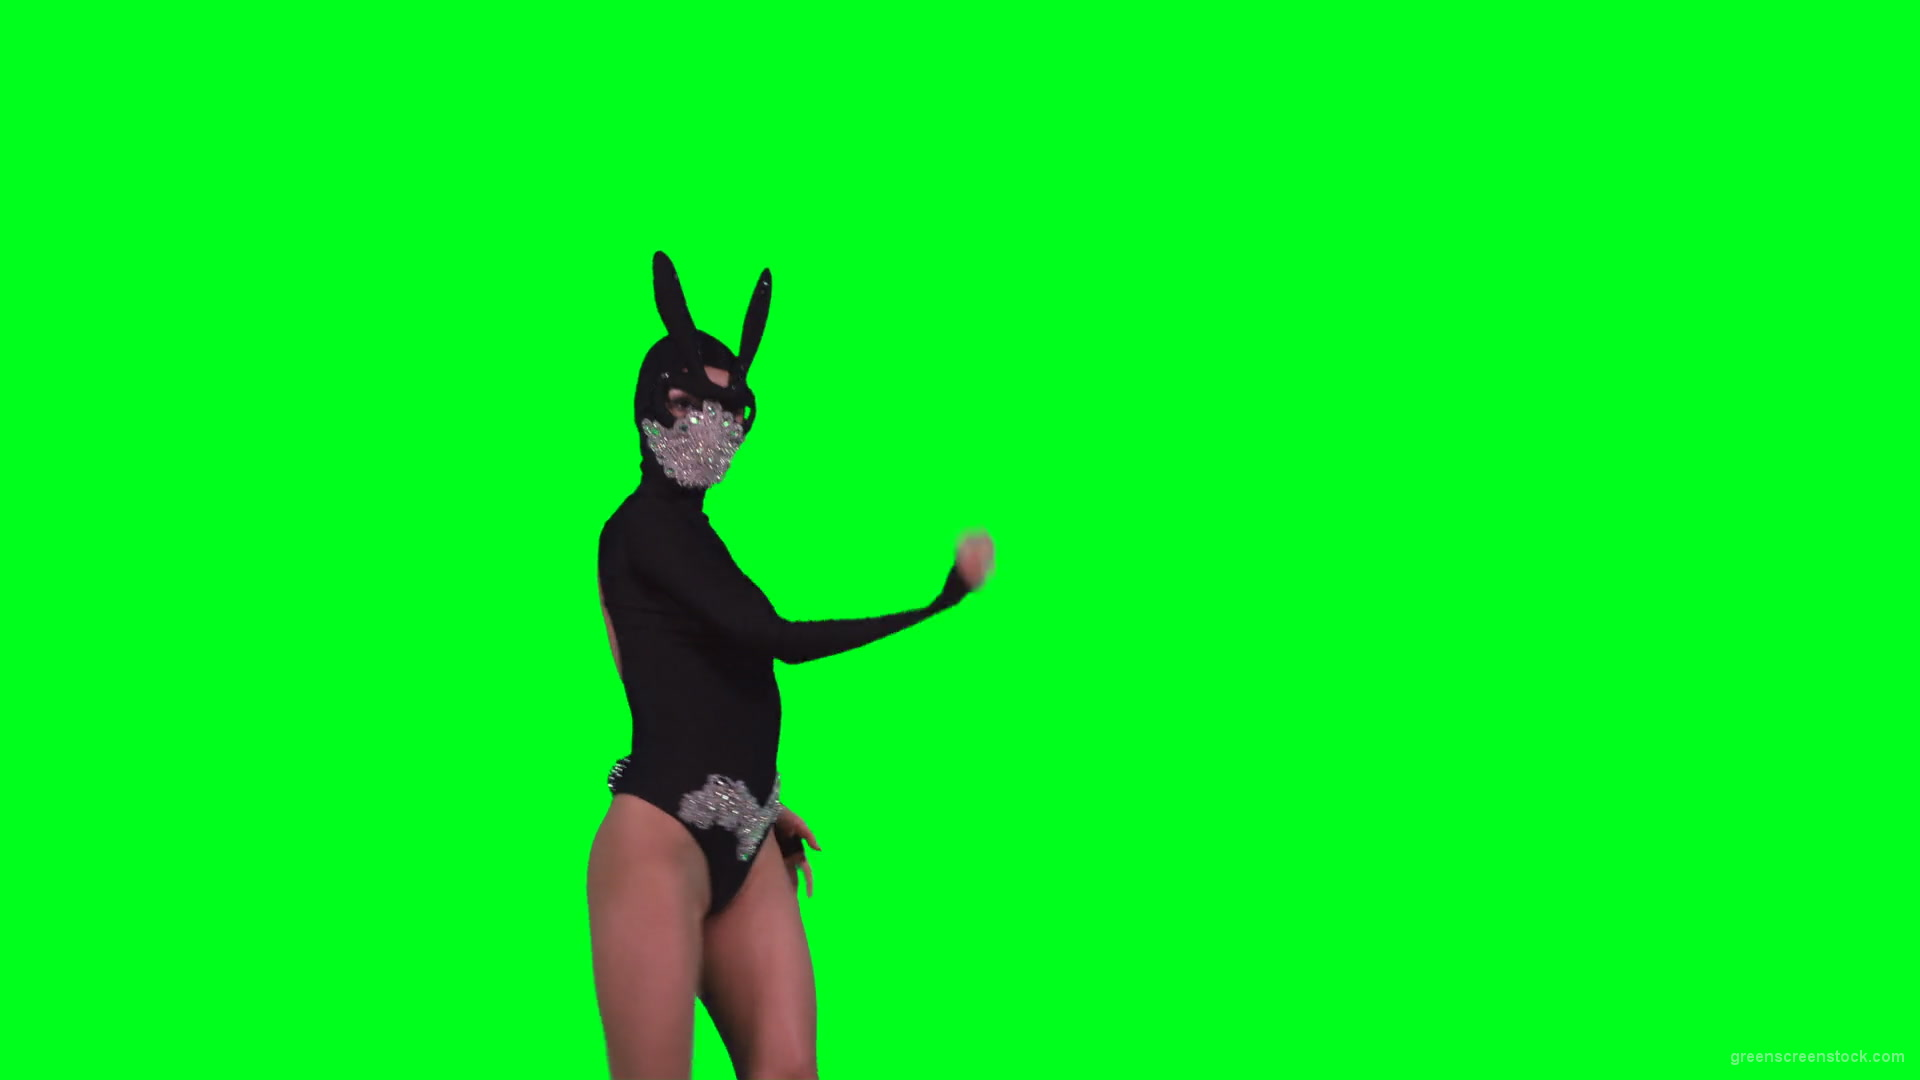 Sexy-Bunny-Girl-in-Rabbit-black-mask-chilling-with-animal-instict-isolated-on-green-screen-4K-Video-Footage-1920_007 Green Screen Stock